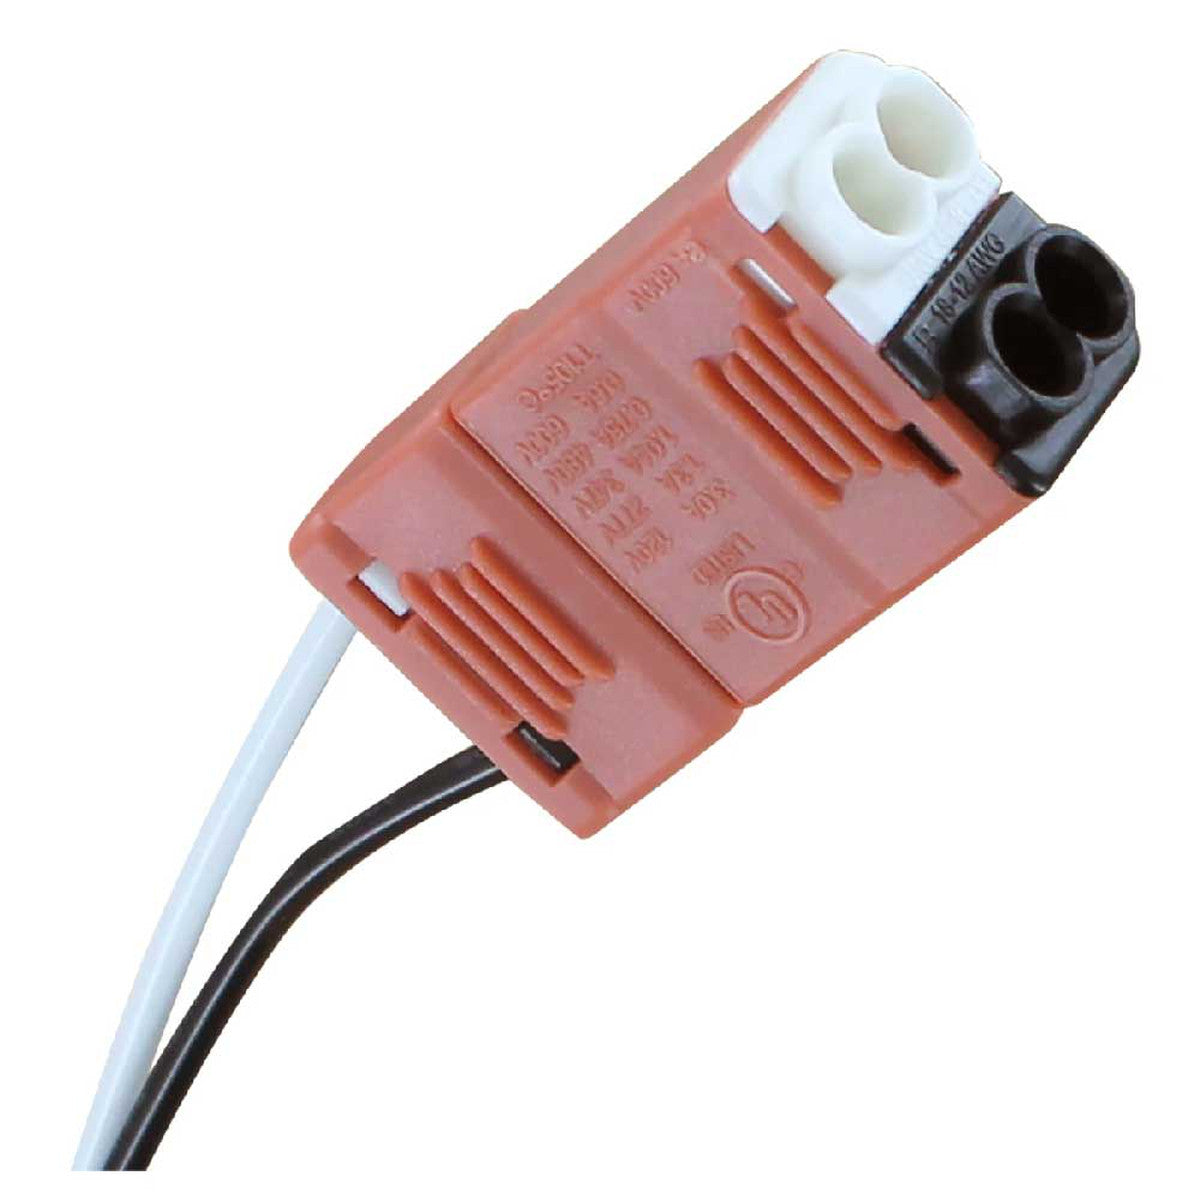 2-Lamp Wiring Harness with Short Non-shunted Sockets for LED Tubes